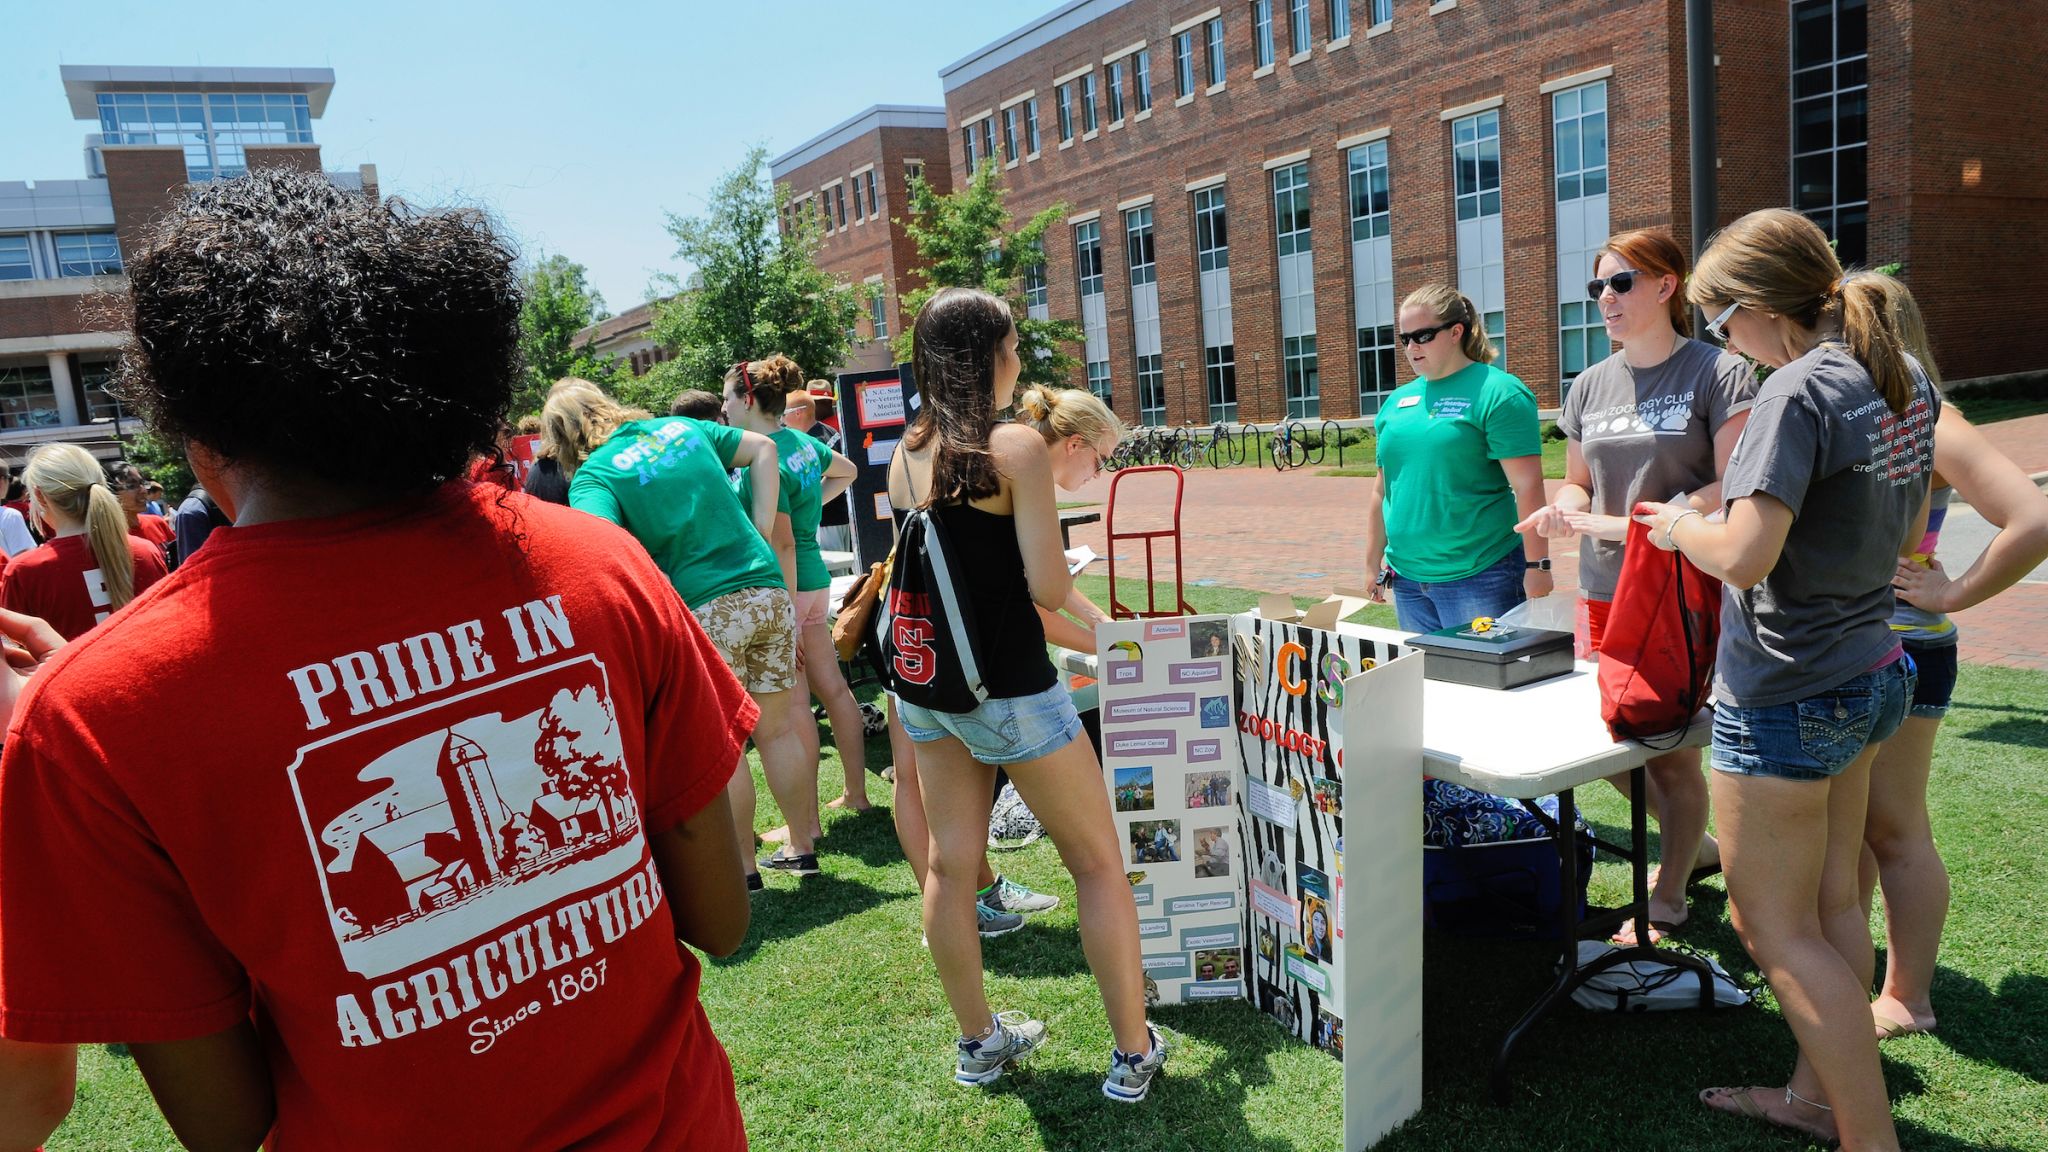 Students check out poster board displays at large gathering on campus green.